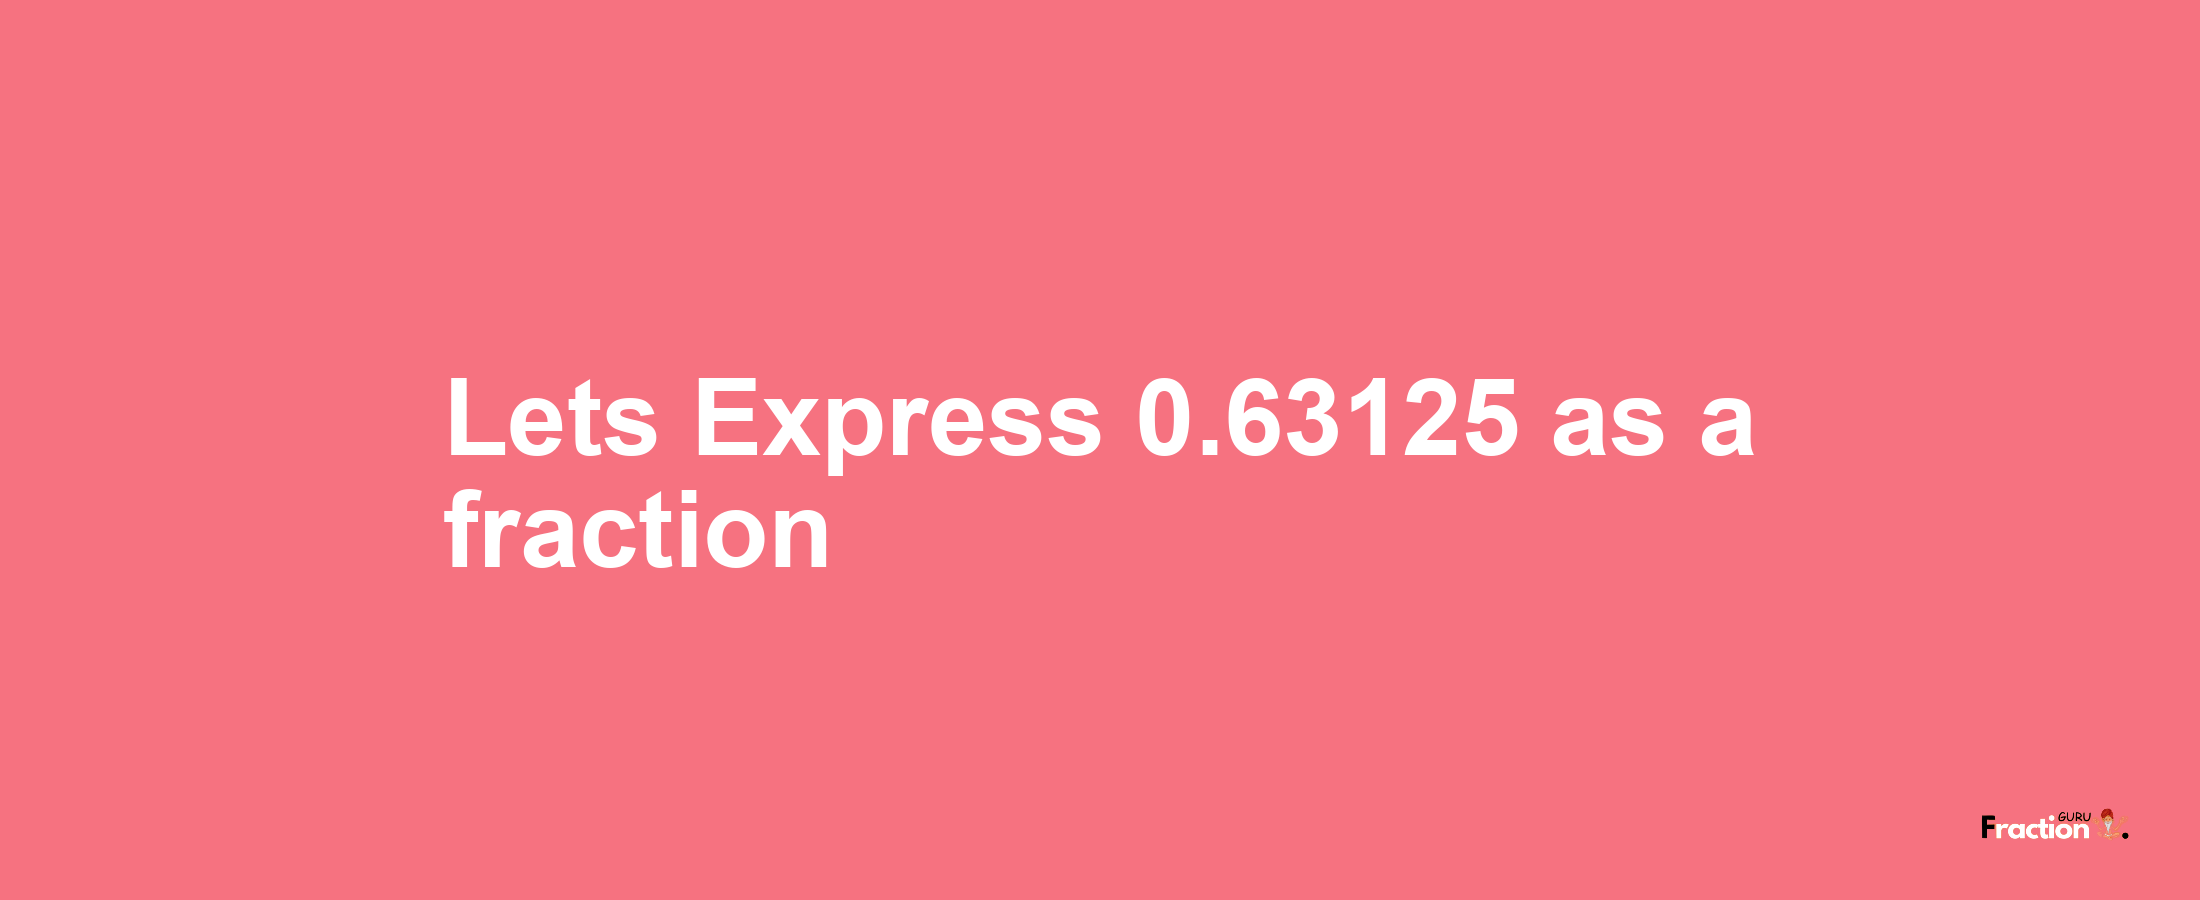 Lets Express 0.63125 as afraction